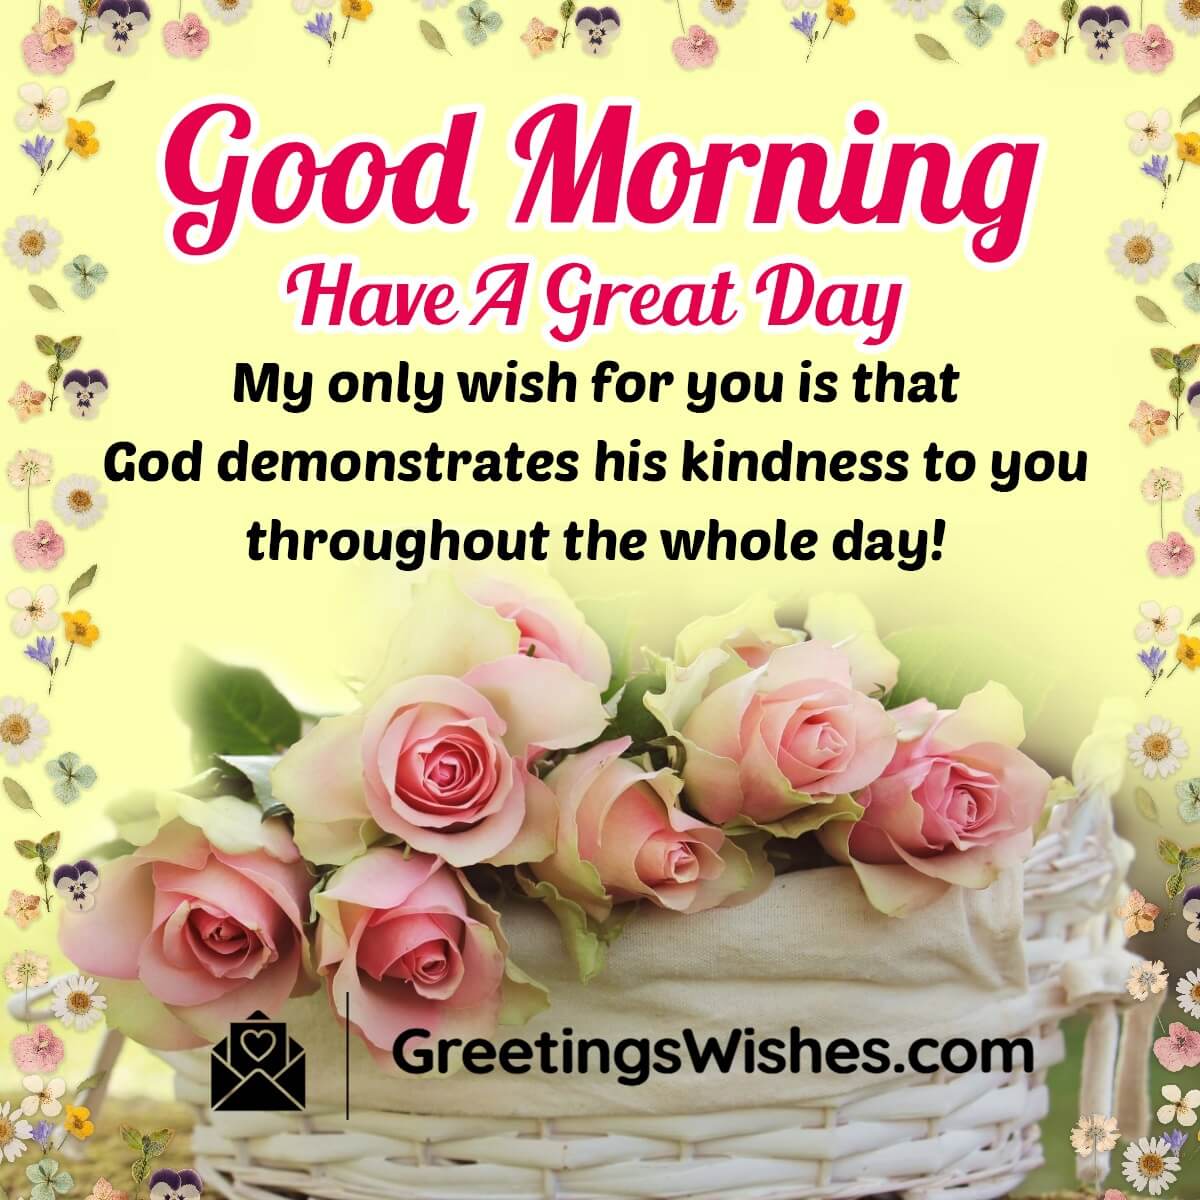 Good Morning Prayer Wishes Greetings Wishes 